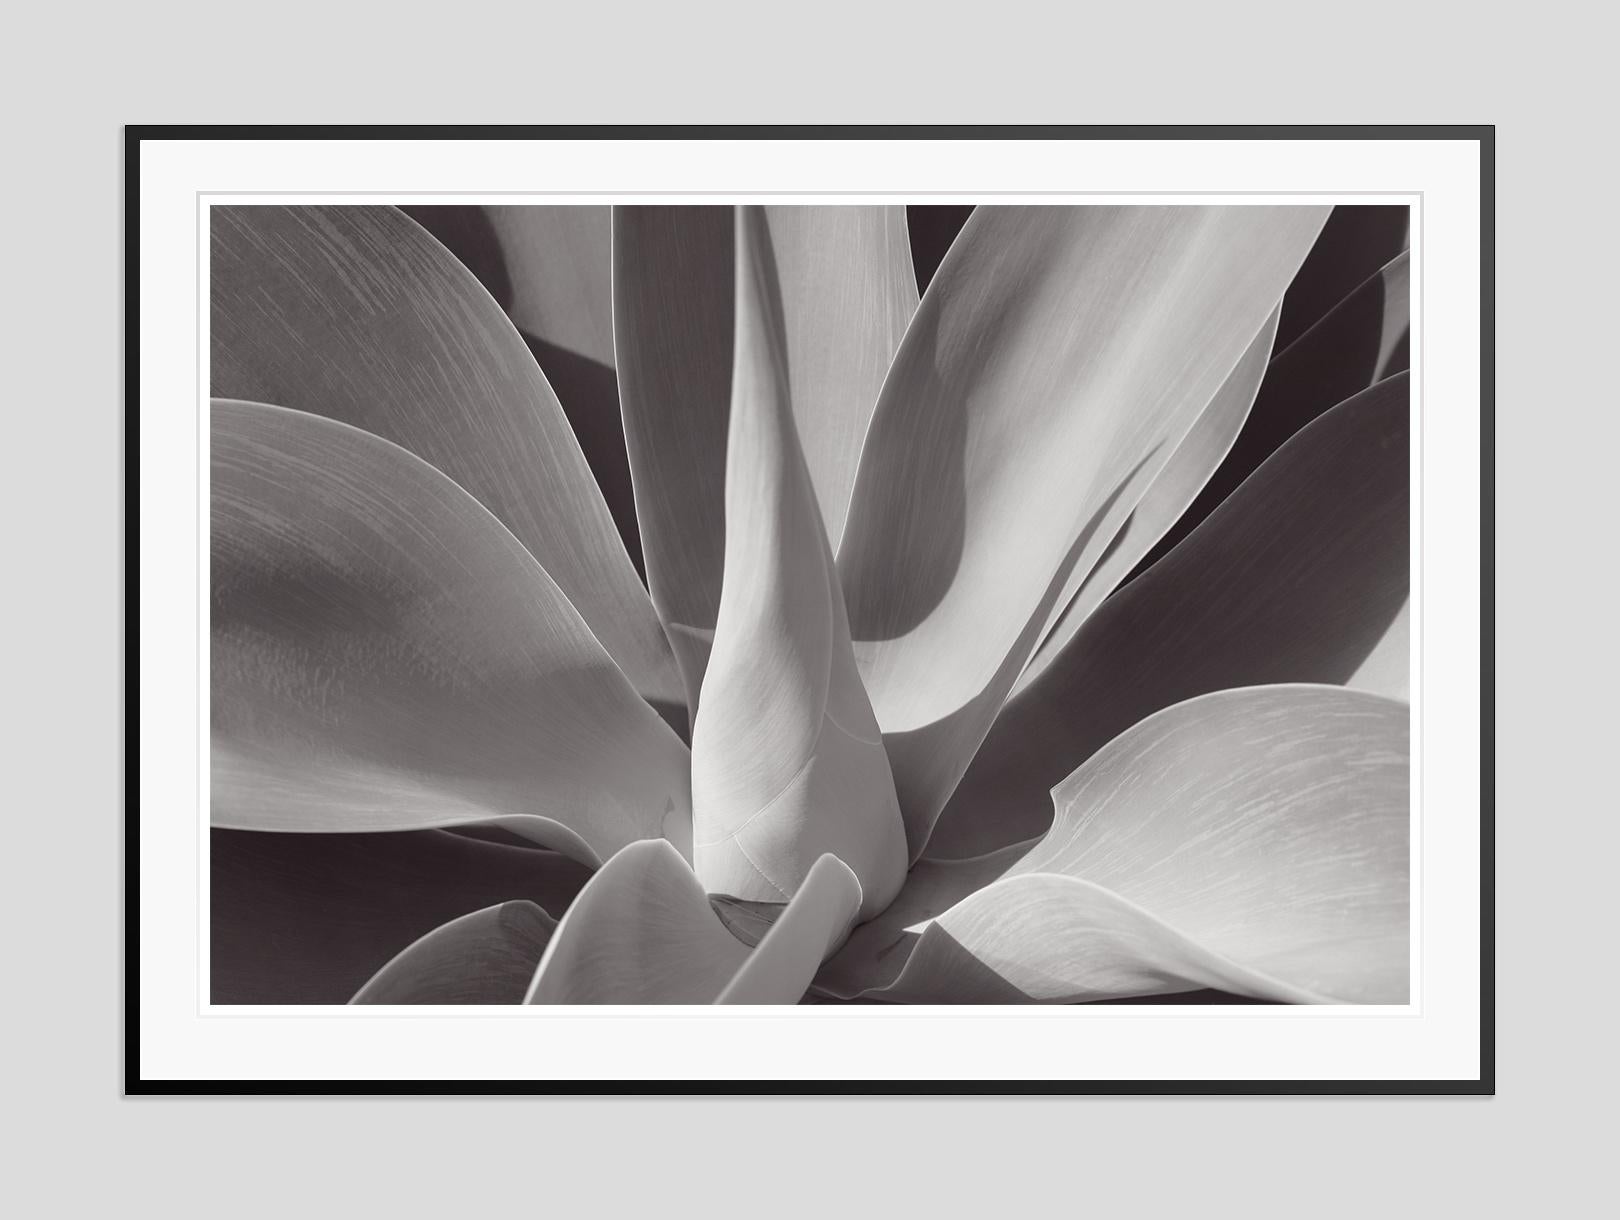 Agave -  Oversize Signed Limited Edition Print  - Photograph by Stuart Möller